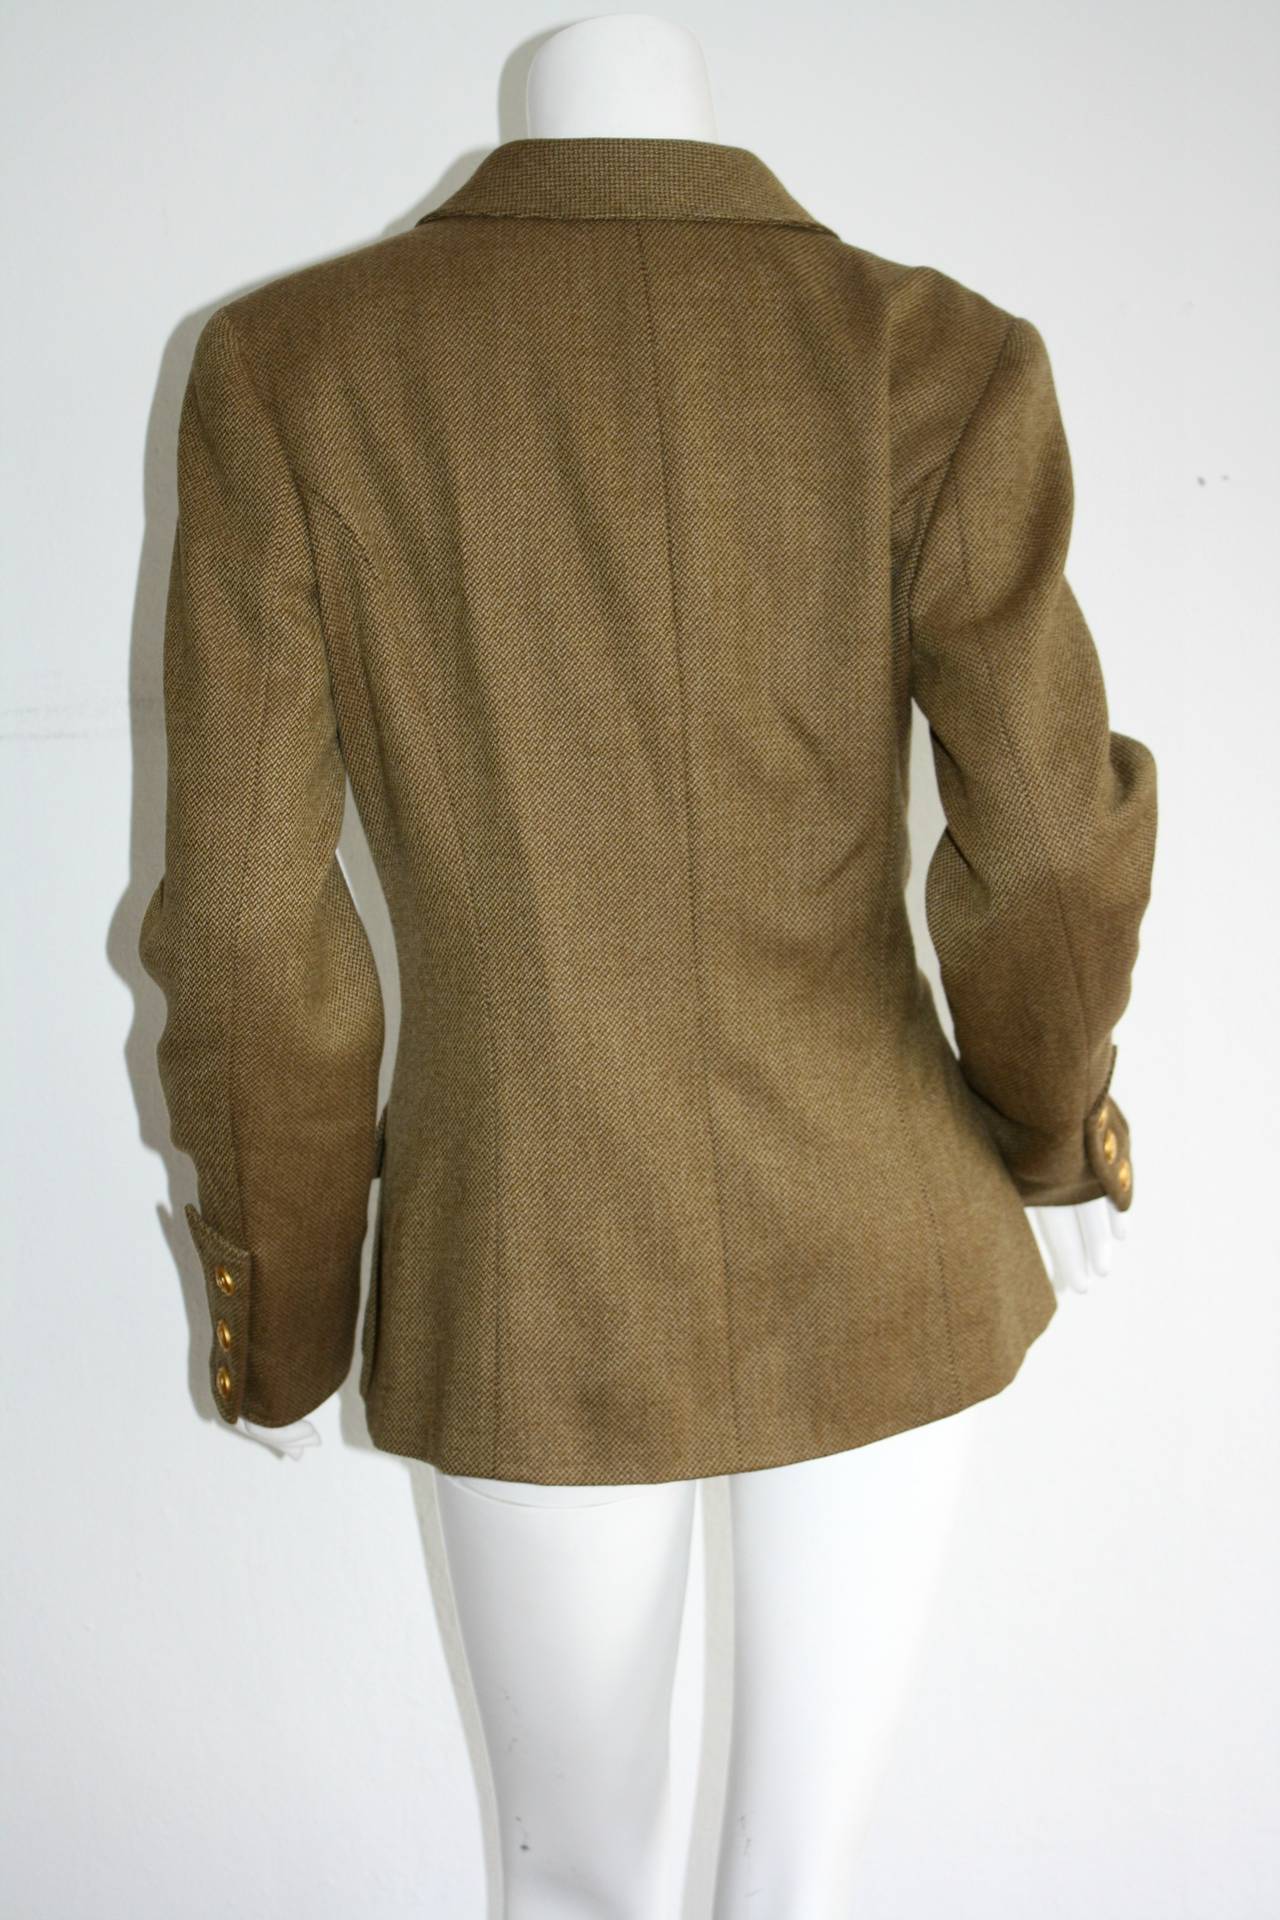 Brown Vintage Chanel 96A Military Sz 42 Jacket Gold Logo Buttons Brand New w/ Tags